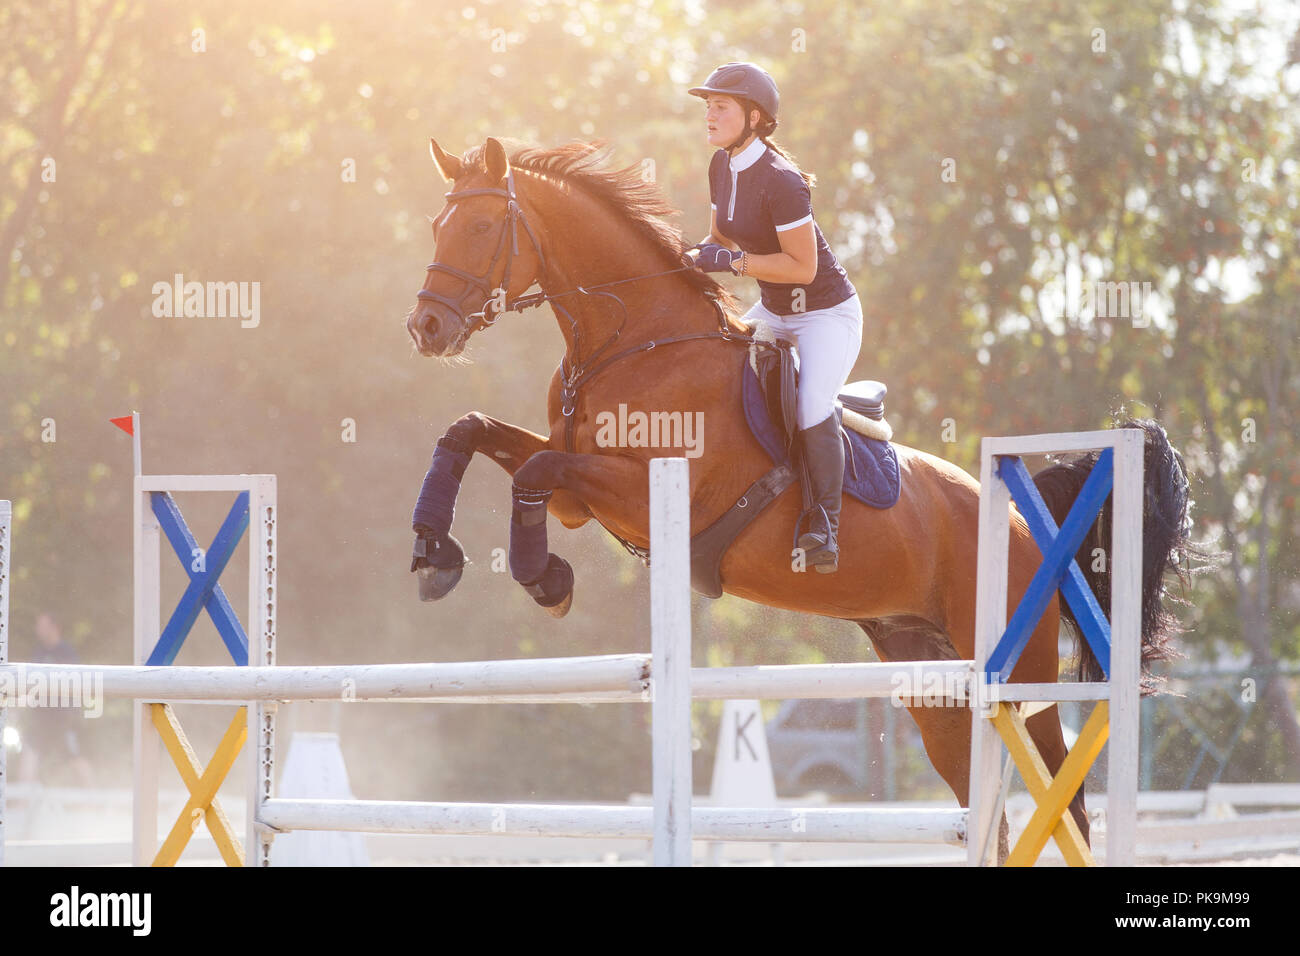 Young horse rider girl on show jumping competition Stock Photo